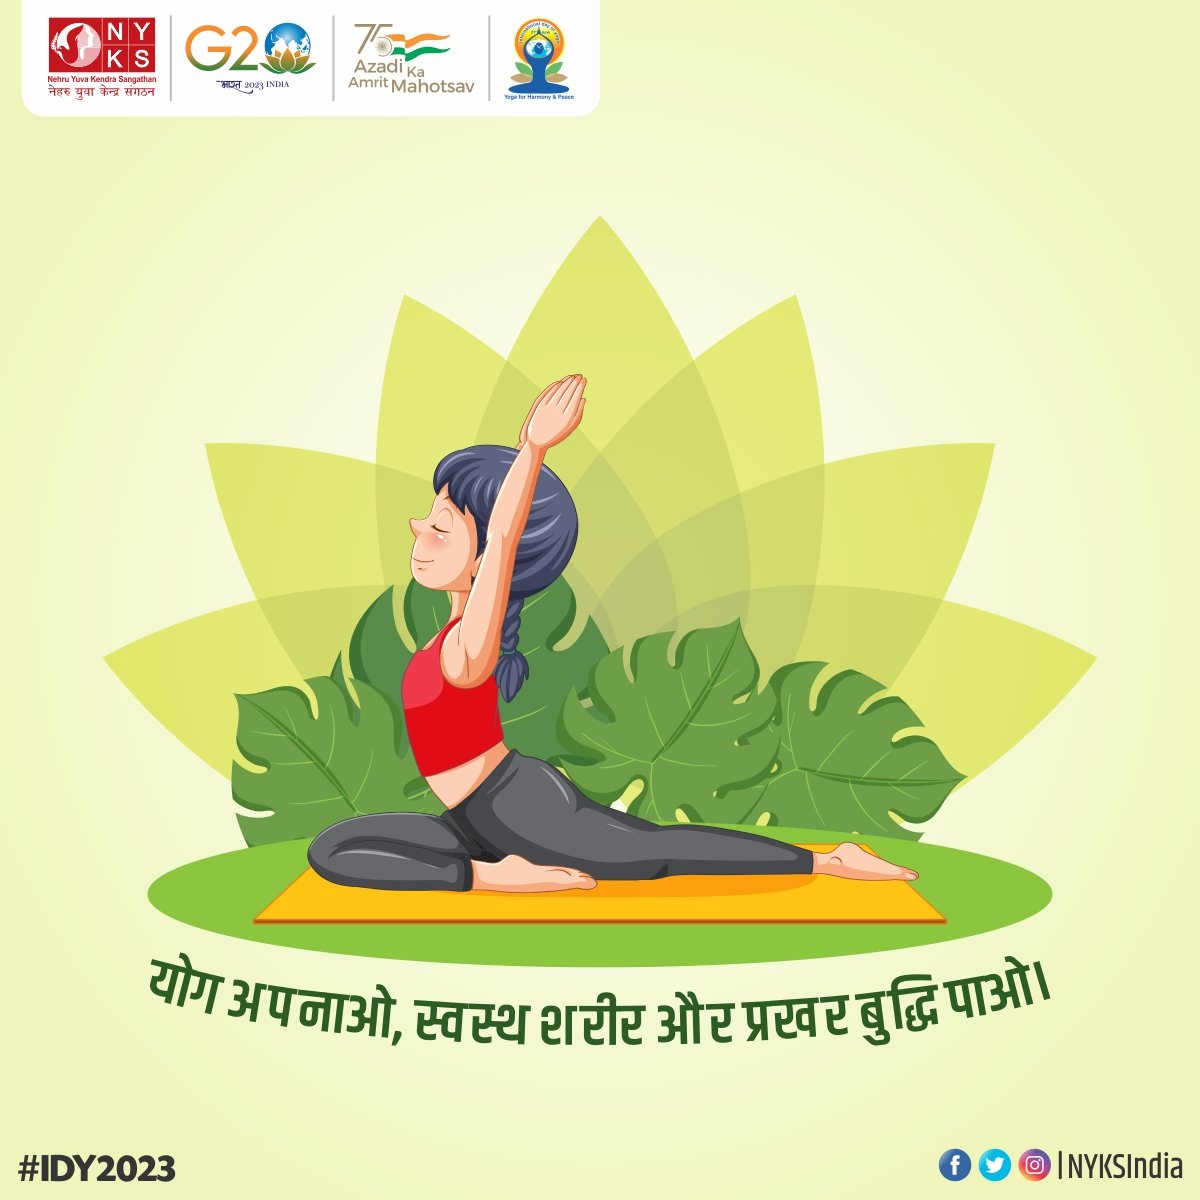 Make yoga a part of your daily routine, and you'll find yourself with a healthier body and a sharper mind.

#NYKS4Yoga #Meditation #Yoga #IDY2023